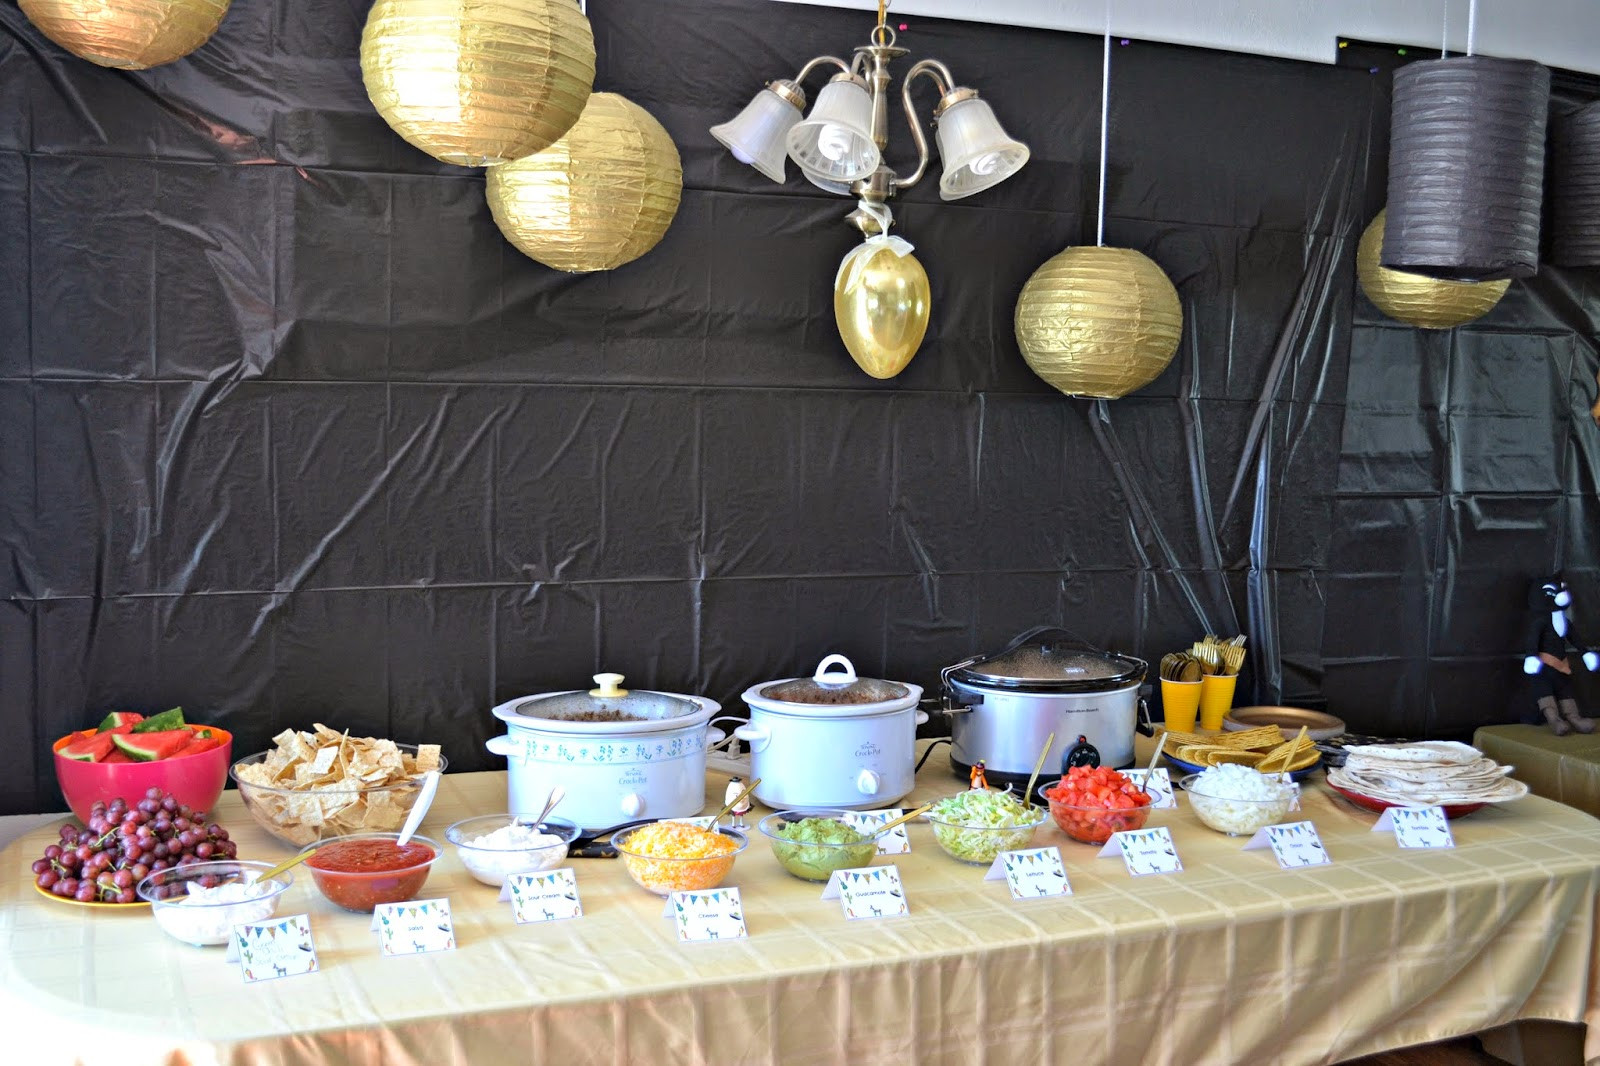 Taco Bar Ideas For Graduation Party
 The Purrfect Puss in Boots Birthday Party Building Our Story